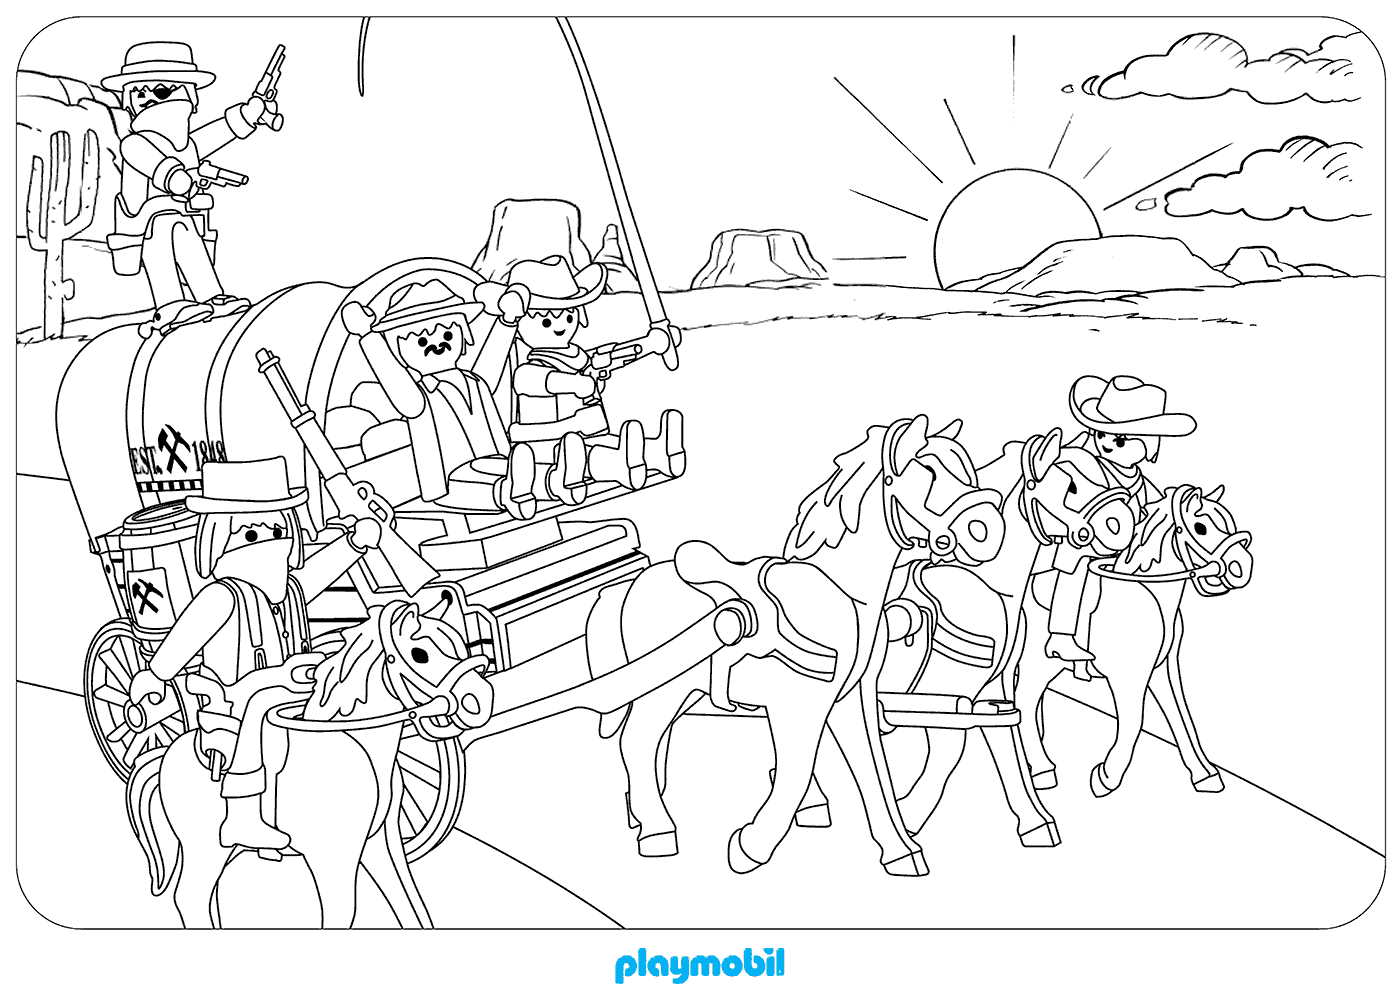 playmobil coloring pages at getdrawings  free download